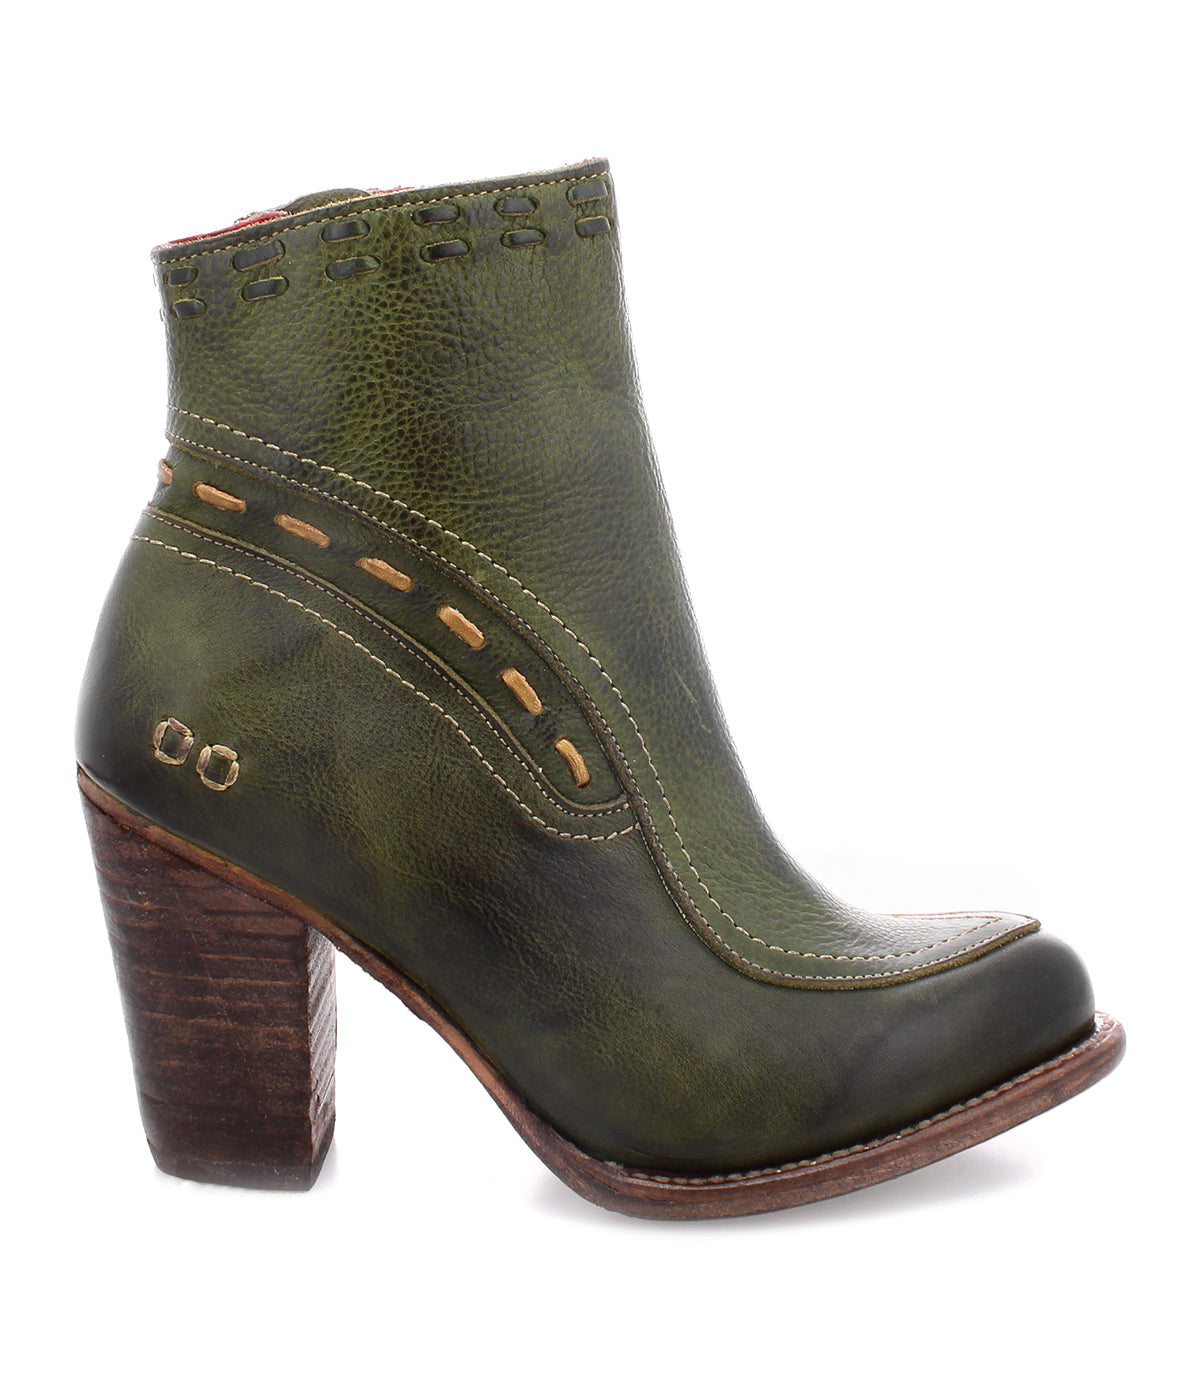 A green leather Yuno ankle boot from Bed Stu.